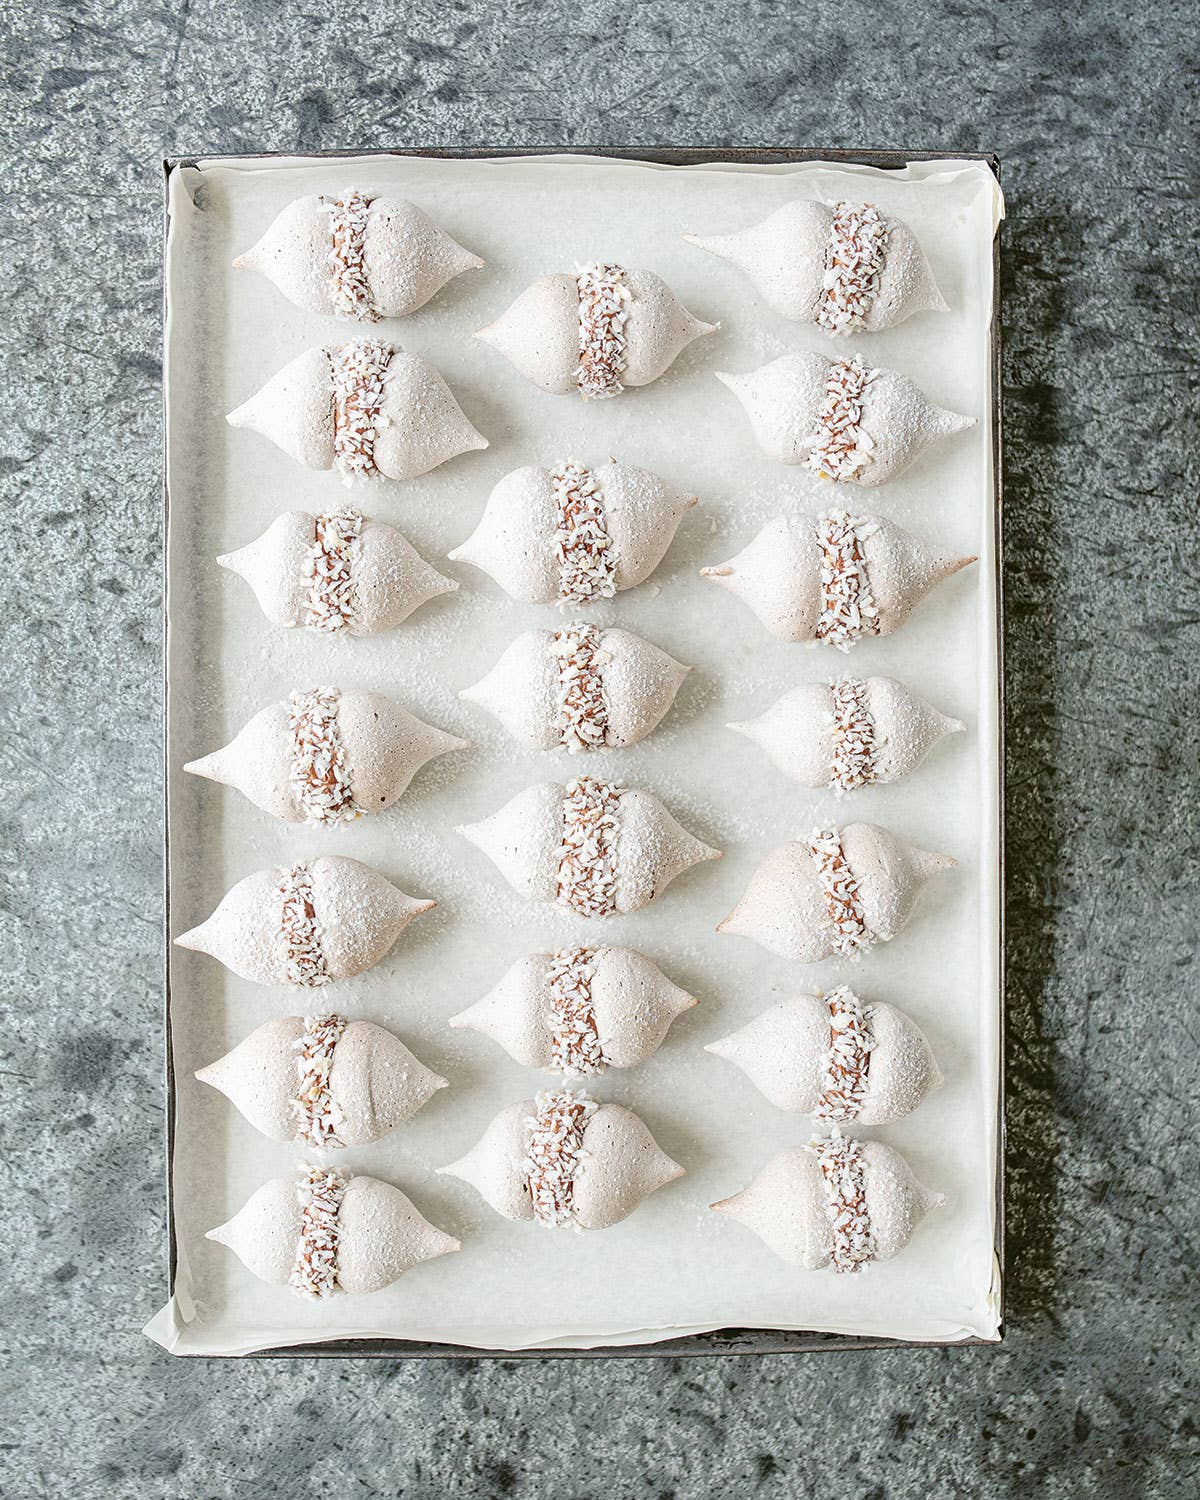 Baby Cocoa Meringues with Chocolate Cream and Candied Coconut